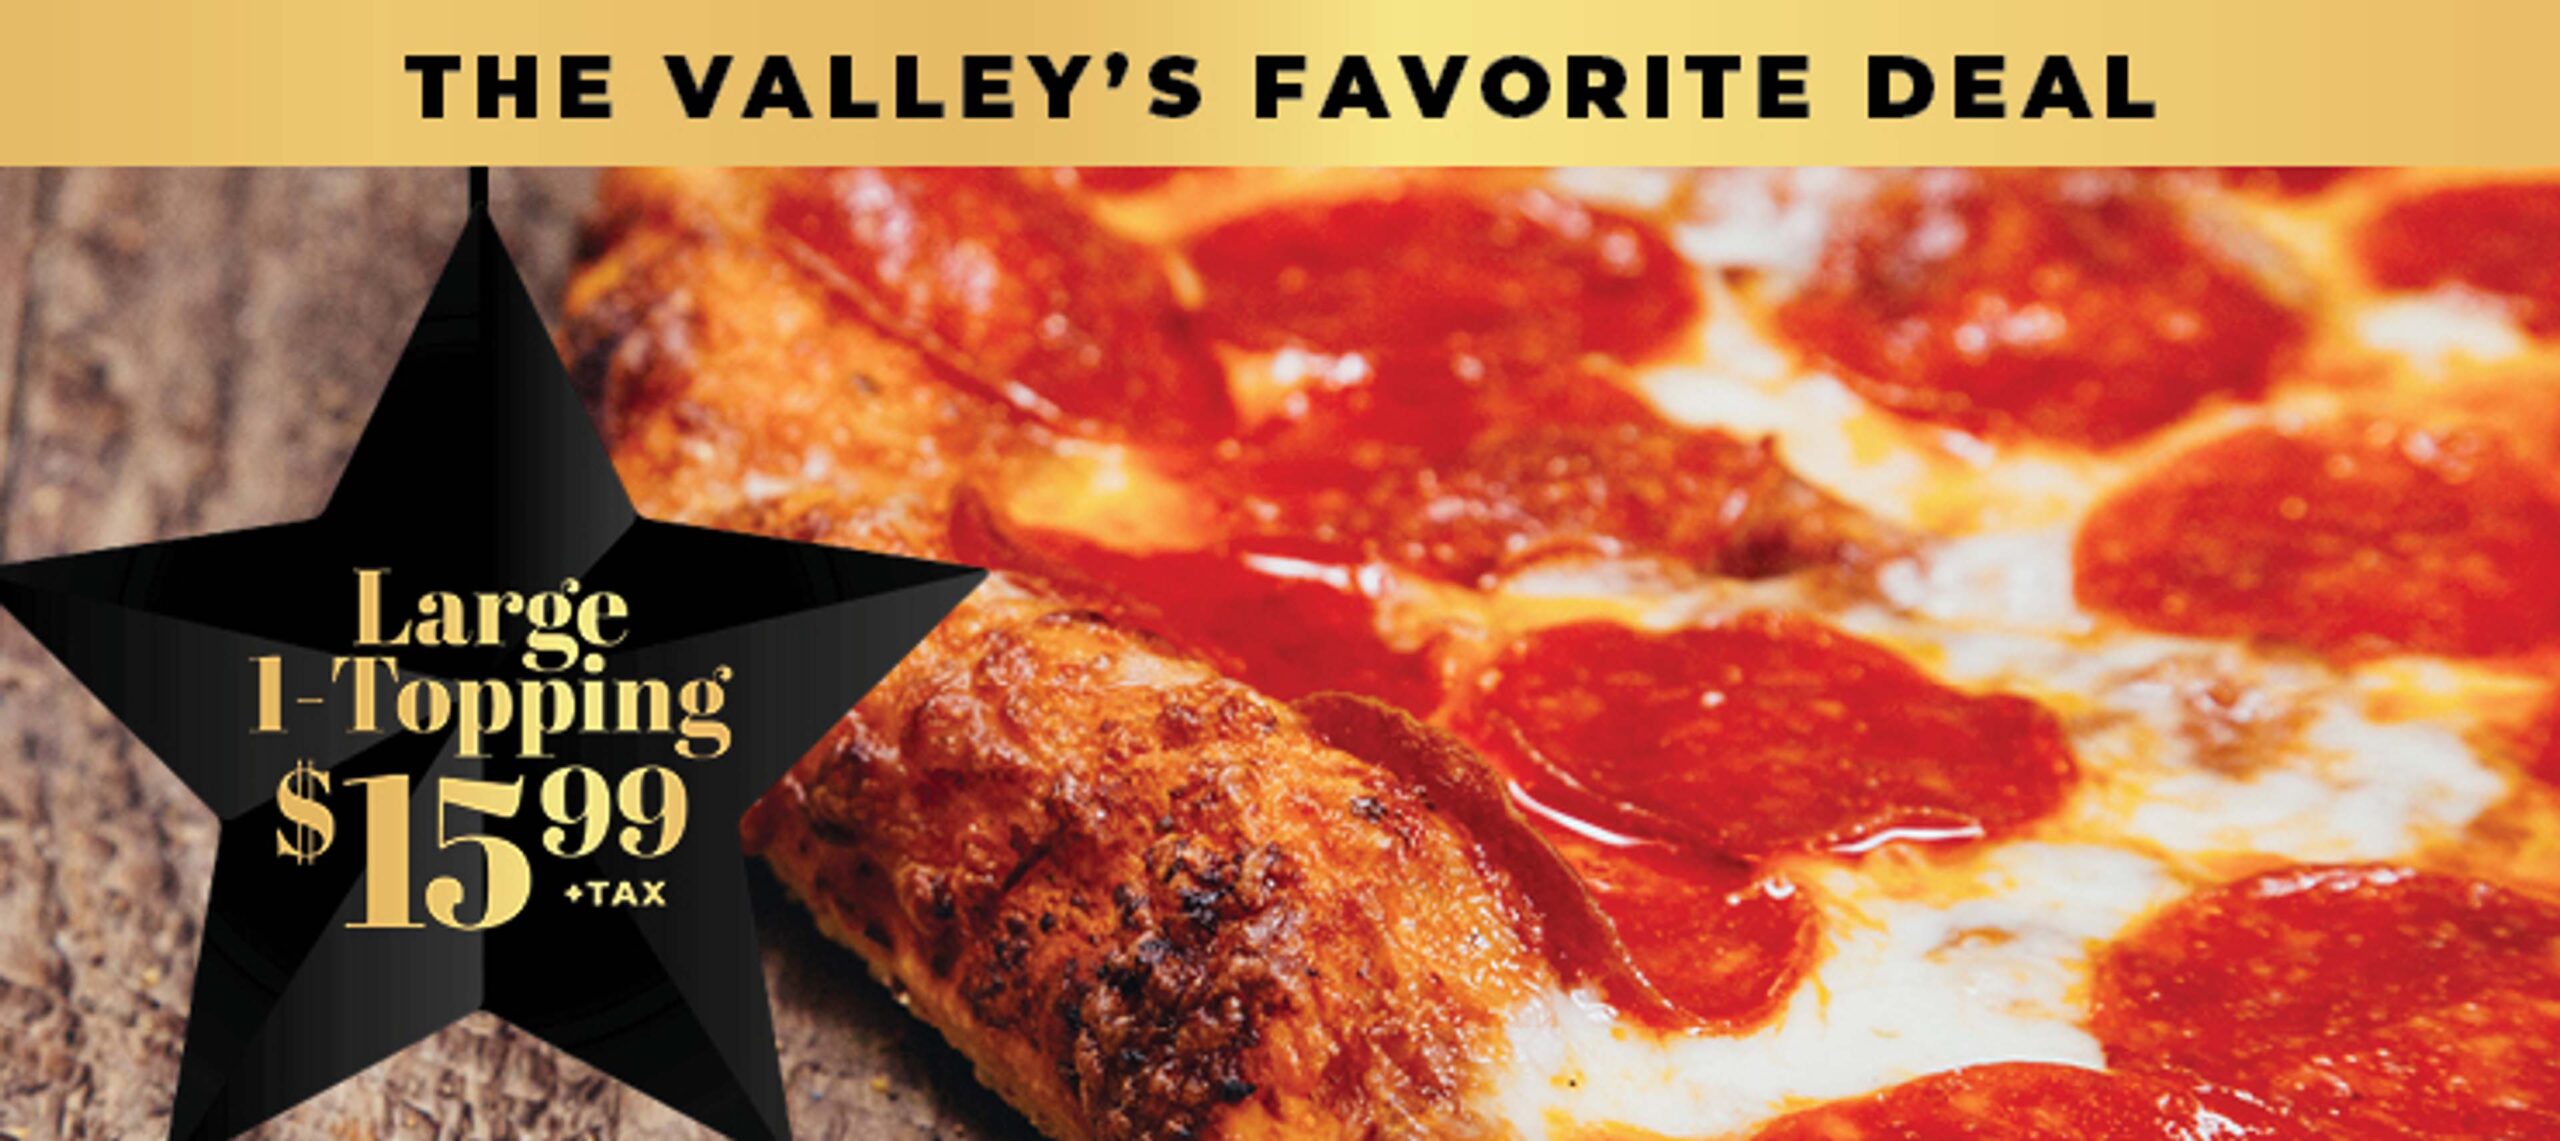 The Valley's Favorite Deal - Large 1-Topping $15.99 + tax